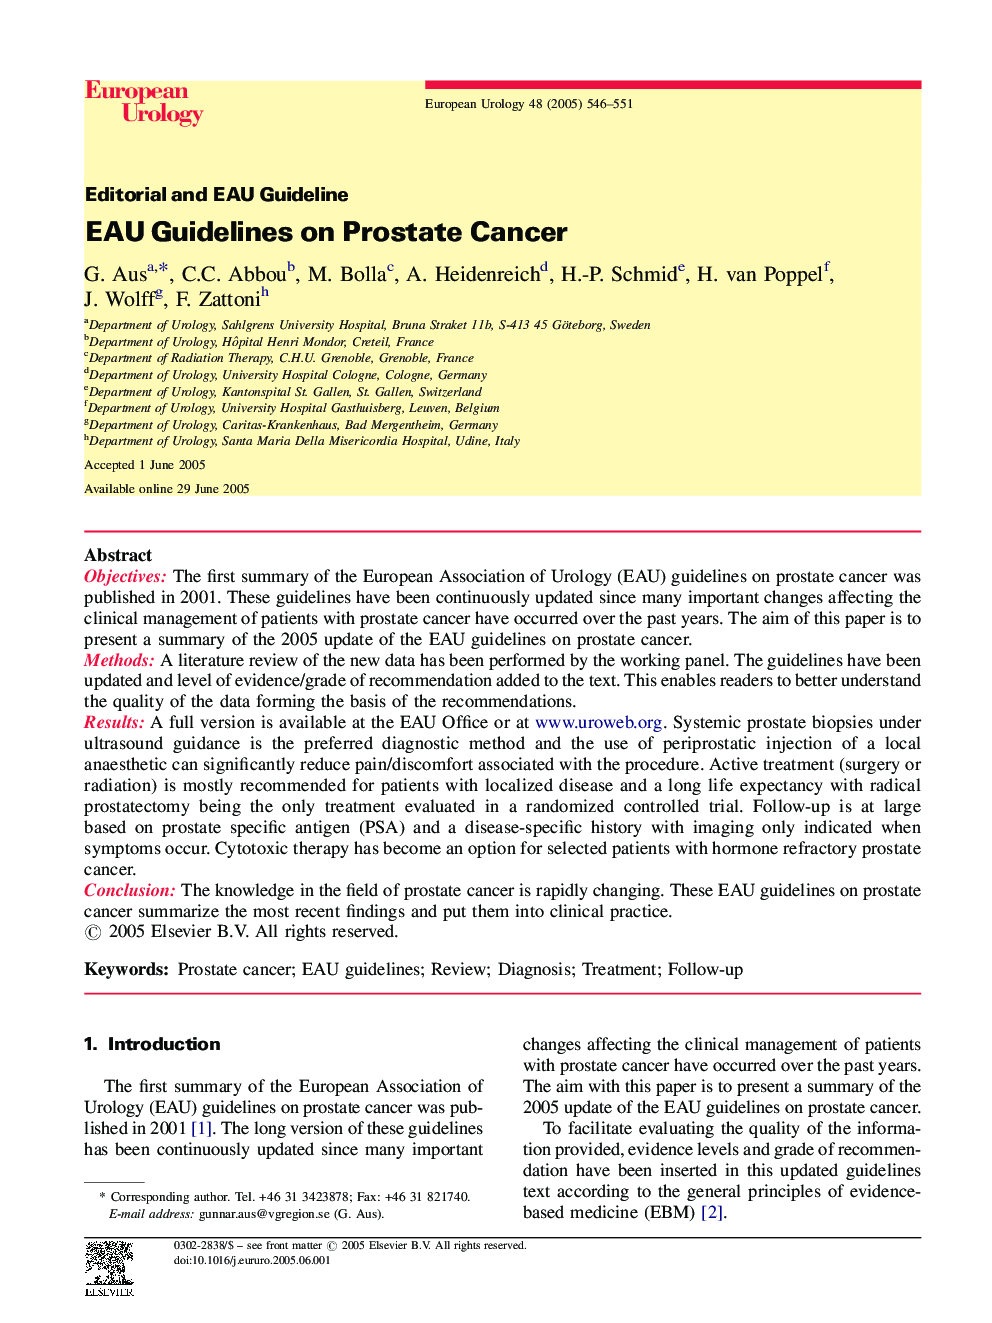 EAU Guidelines on Prostate Cancer